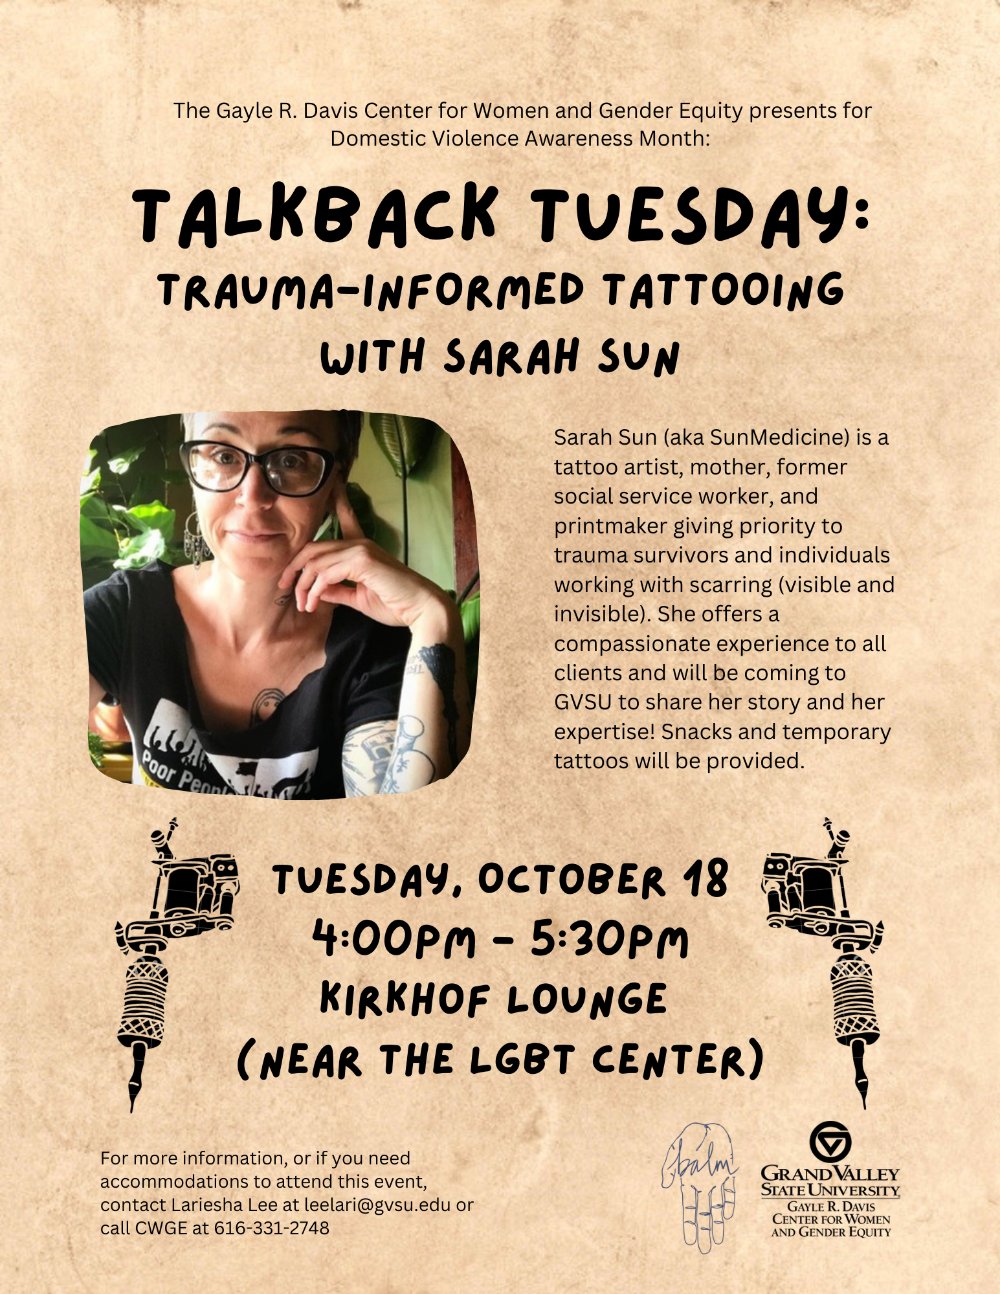 Talk Back Tuesday - Trauma Informed Tattooing with Sarah Sun. Tuesday, October 18 4:00pm - 5:30pm Kirkhof Lounge  (Near the LGBT Center)